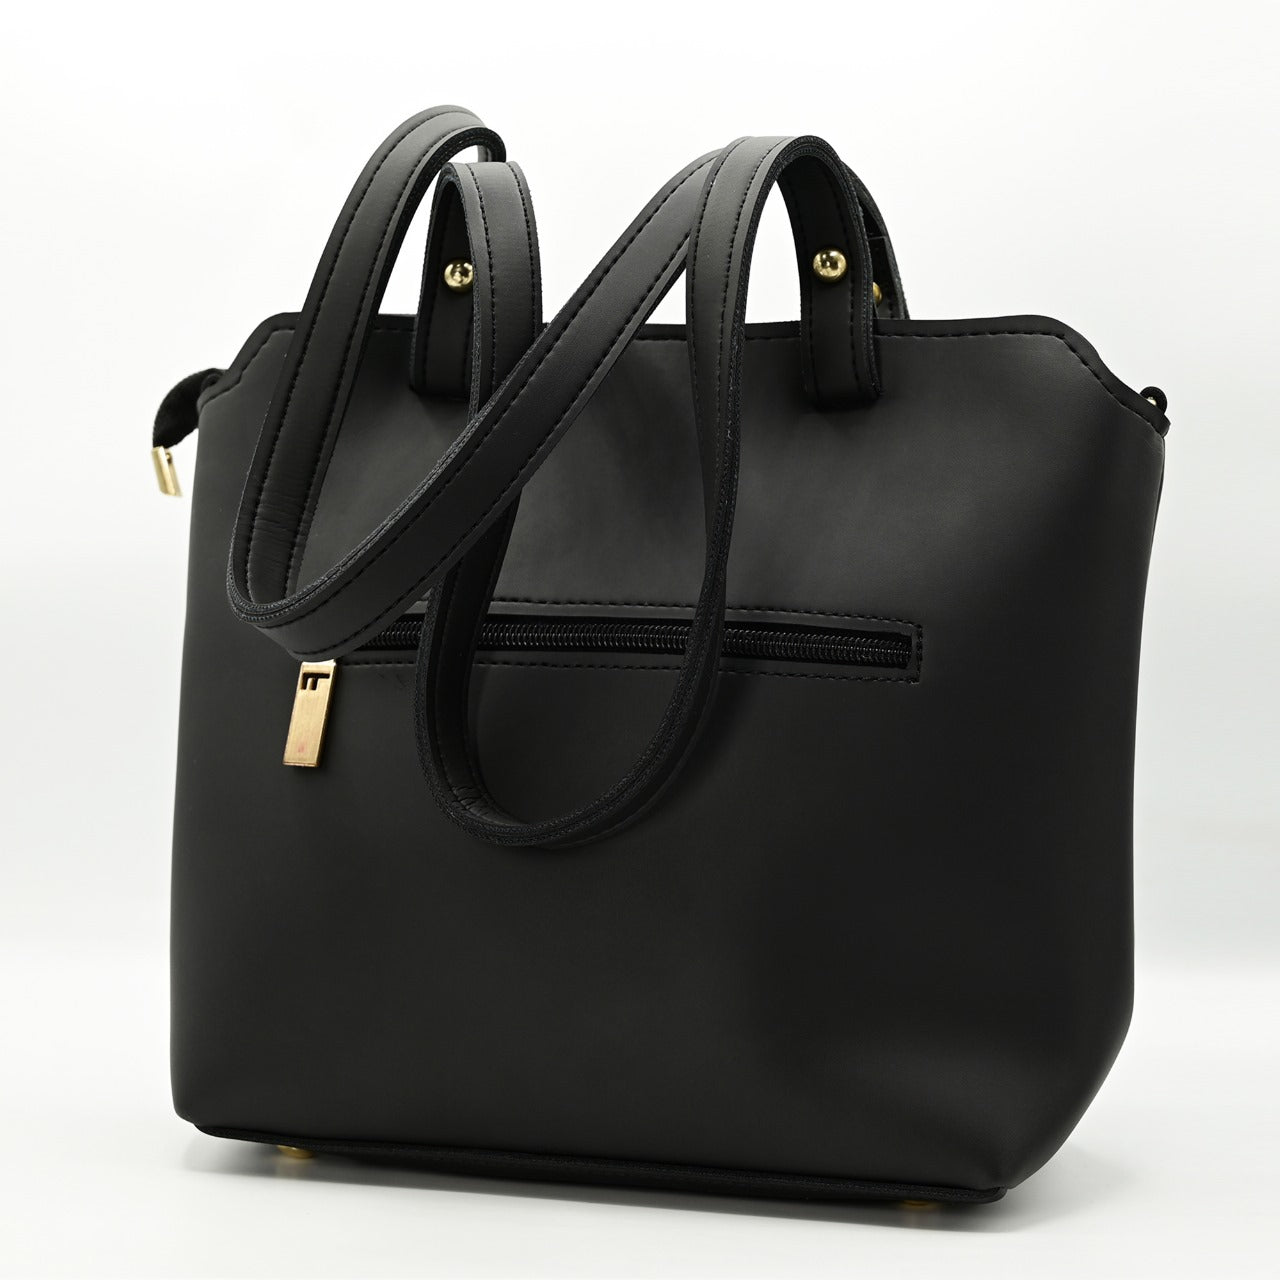 Imported Bag Article in Black Colours Code 8